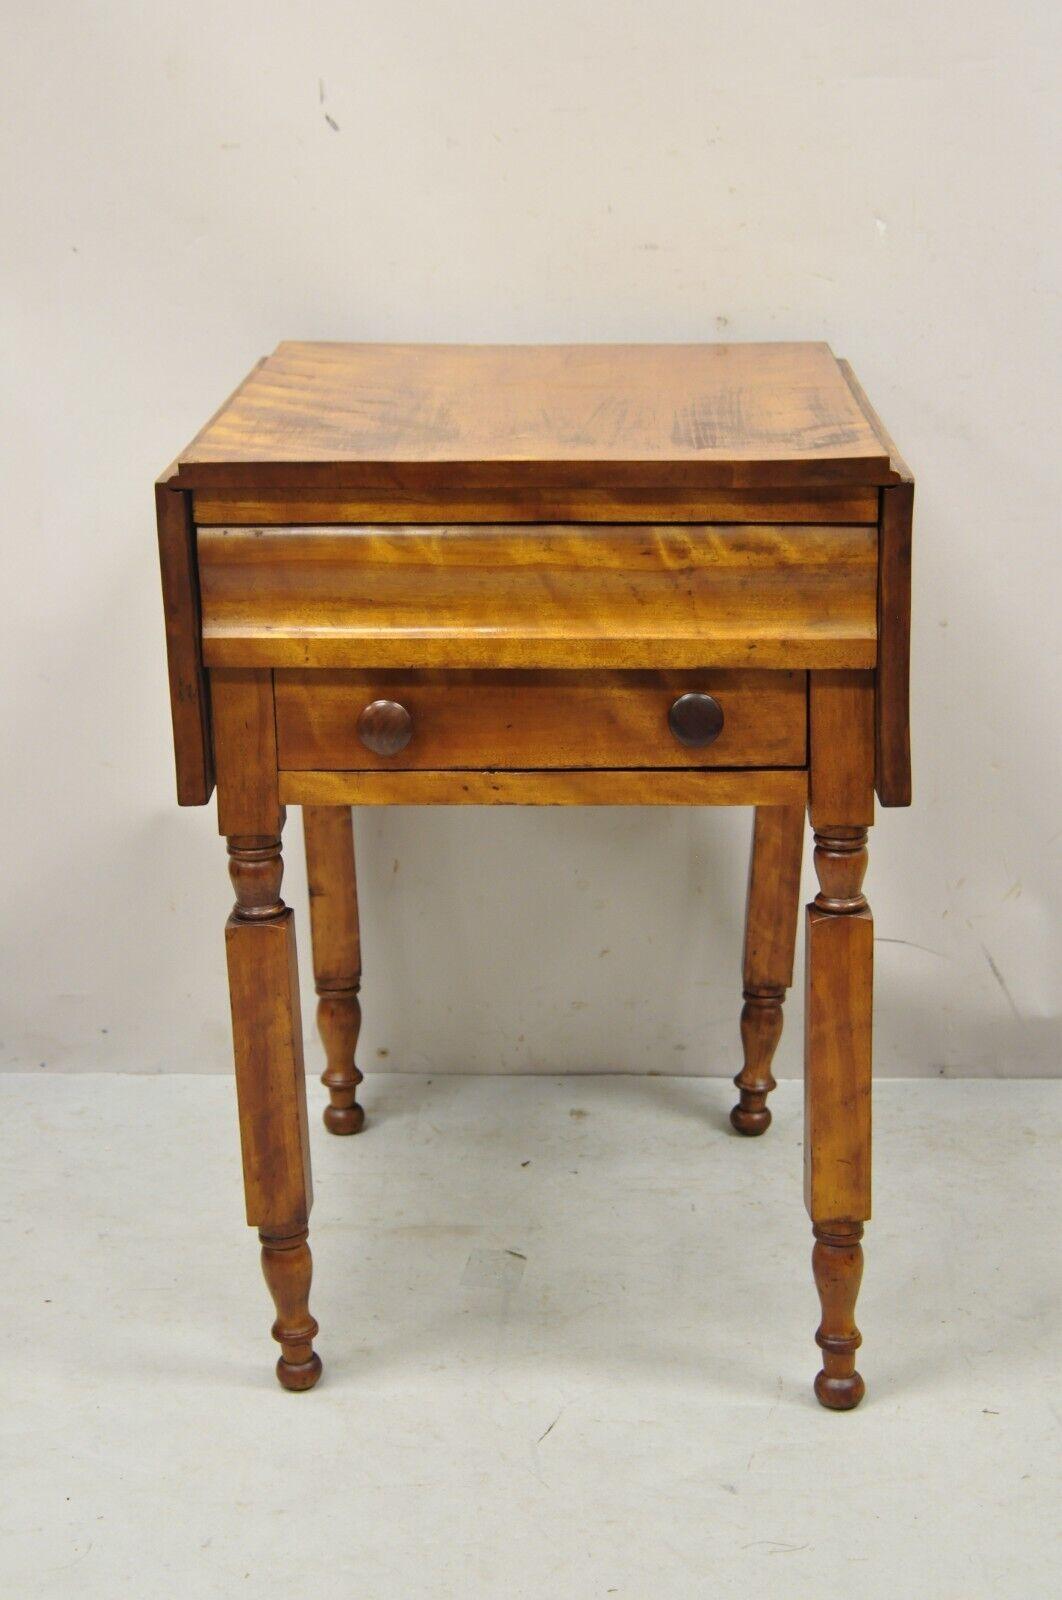 Antique Victorian Chestnut Drop Leaf Work Table Side Table with 2 Drawers For Sale 3